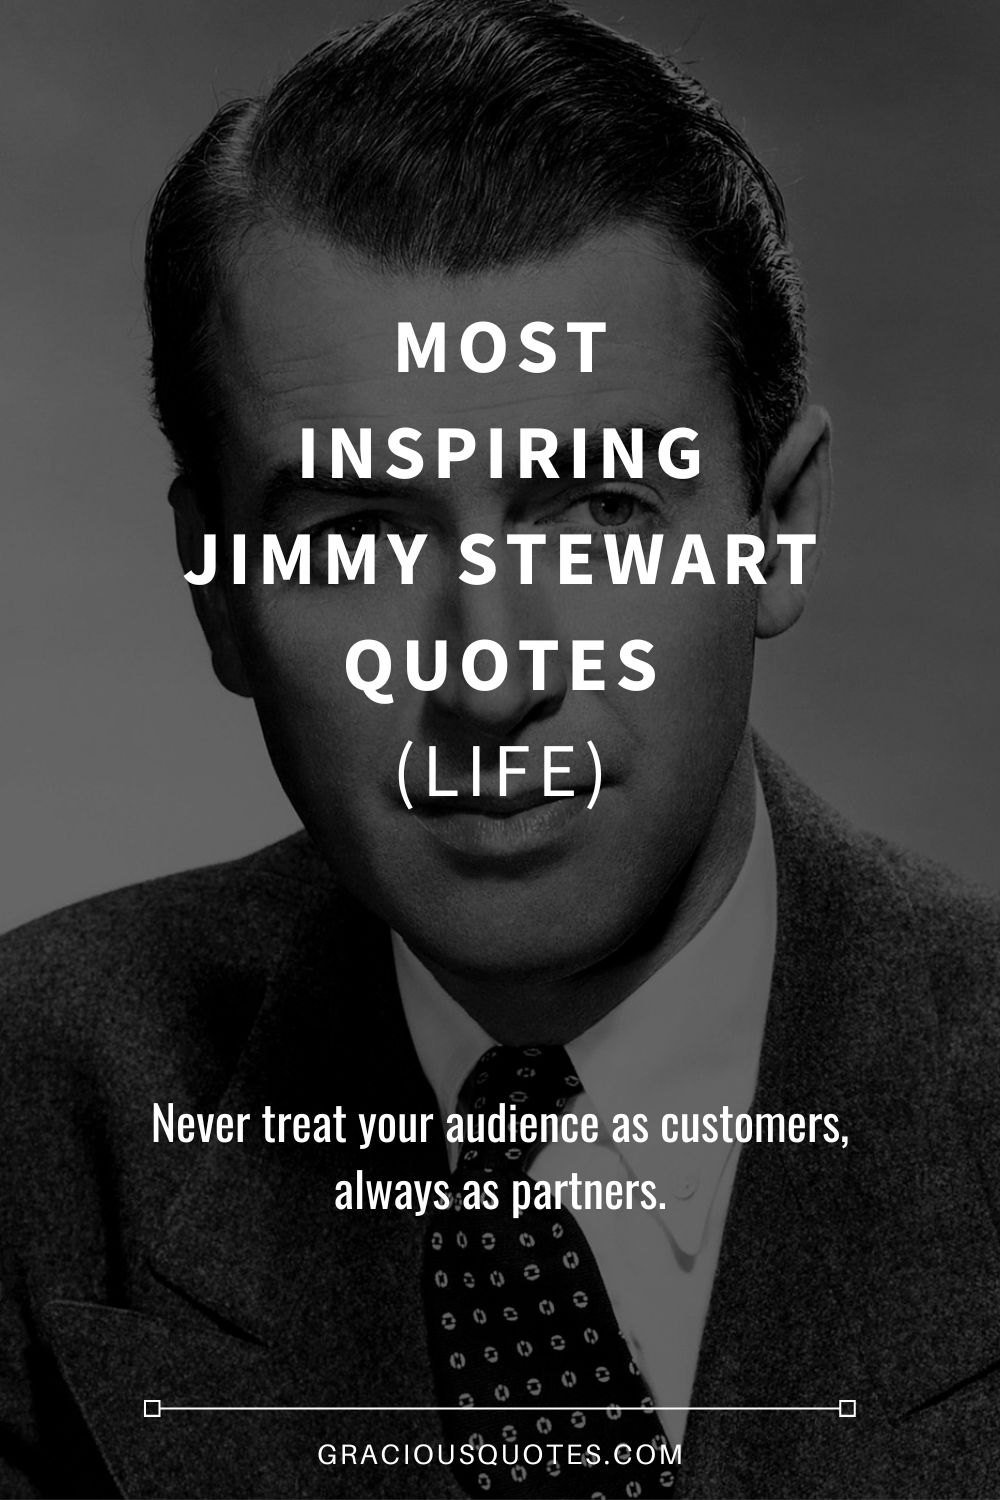 Most Inspiring Jimmy Stewart Quotes (LIFE) - Gracious Quotes